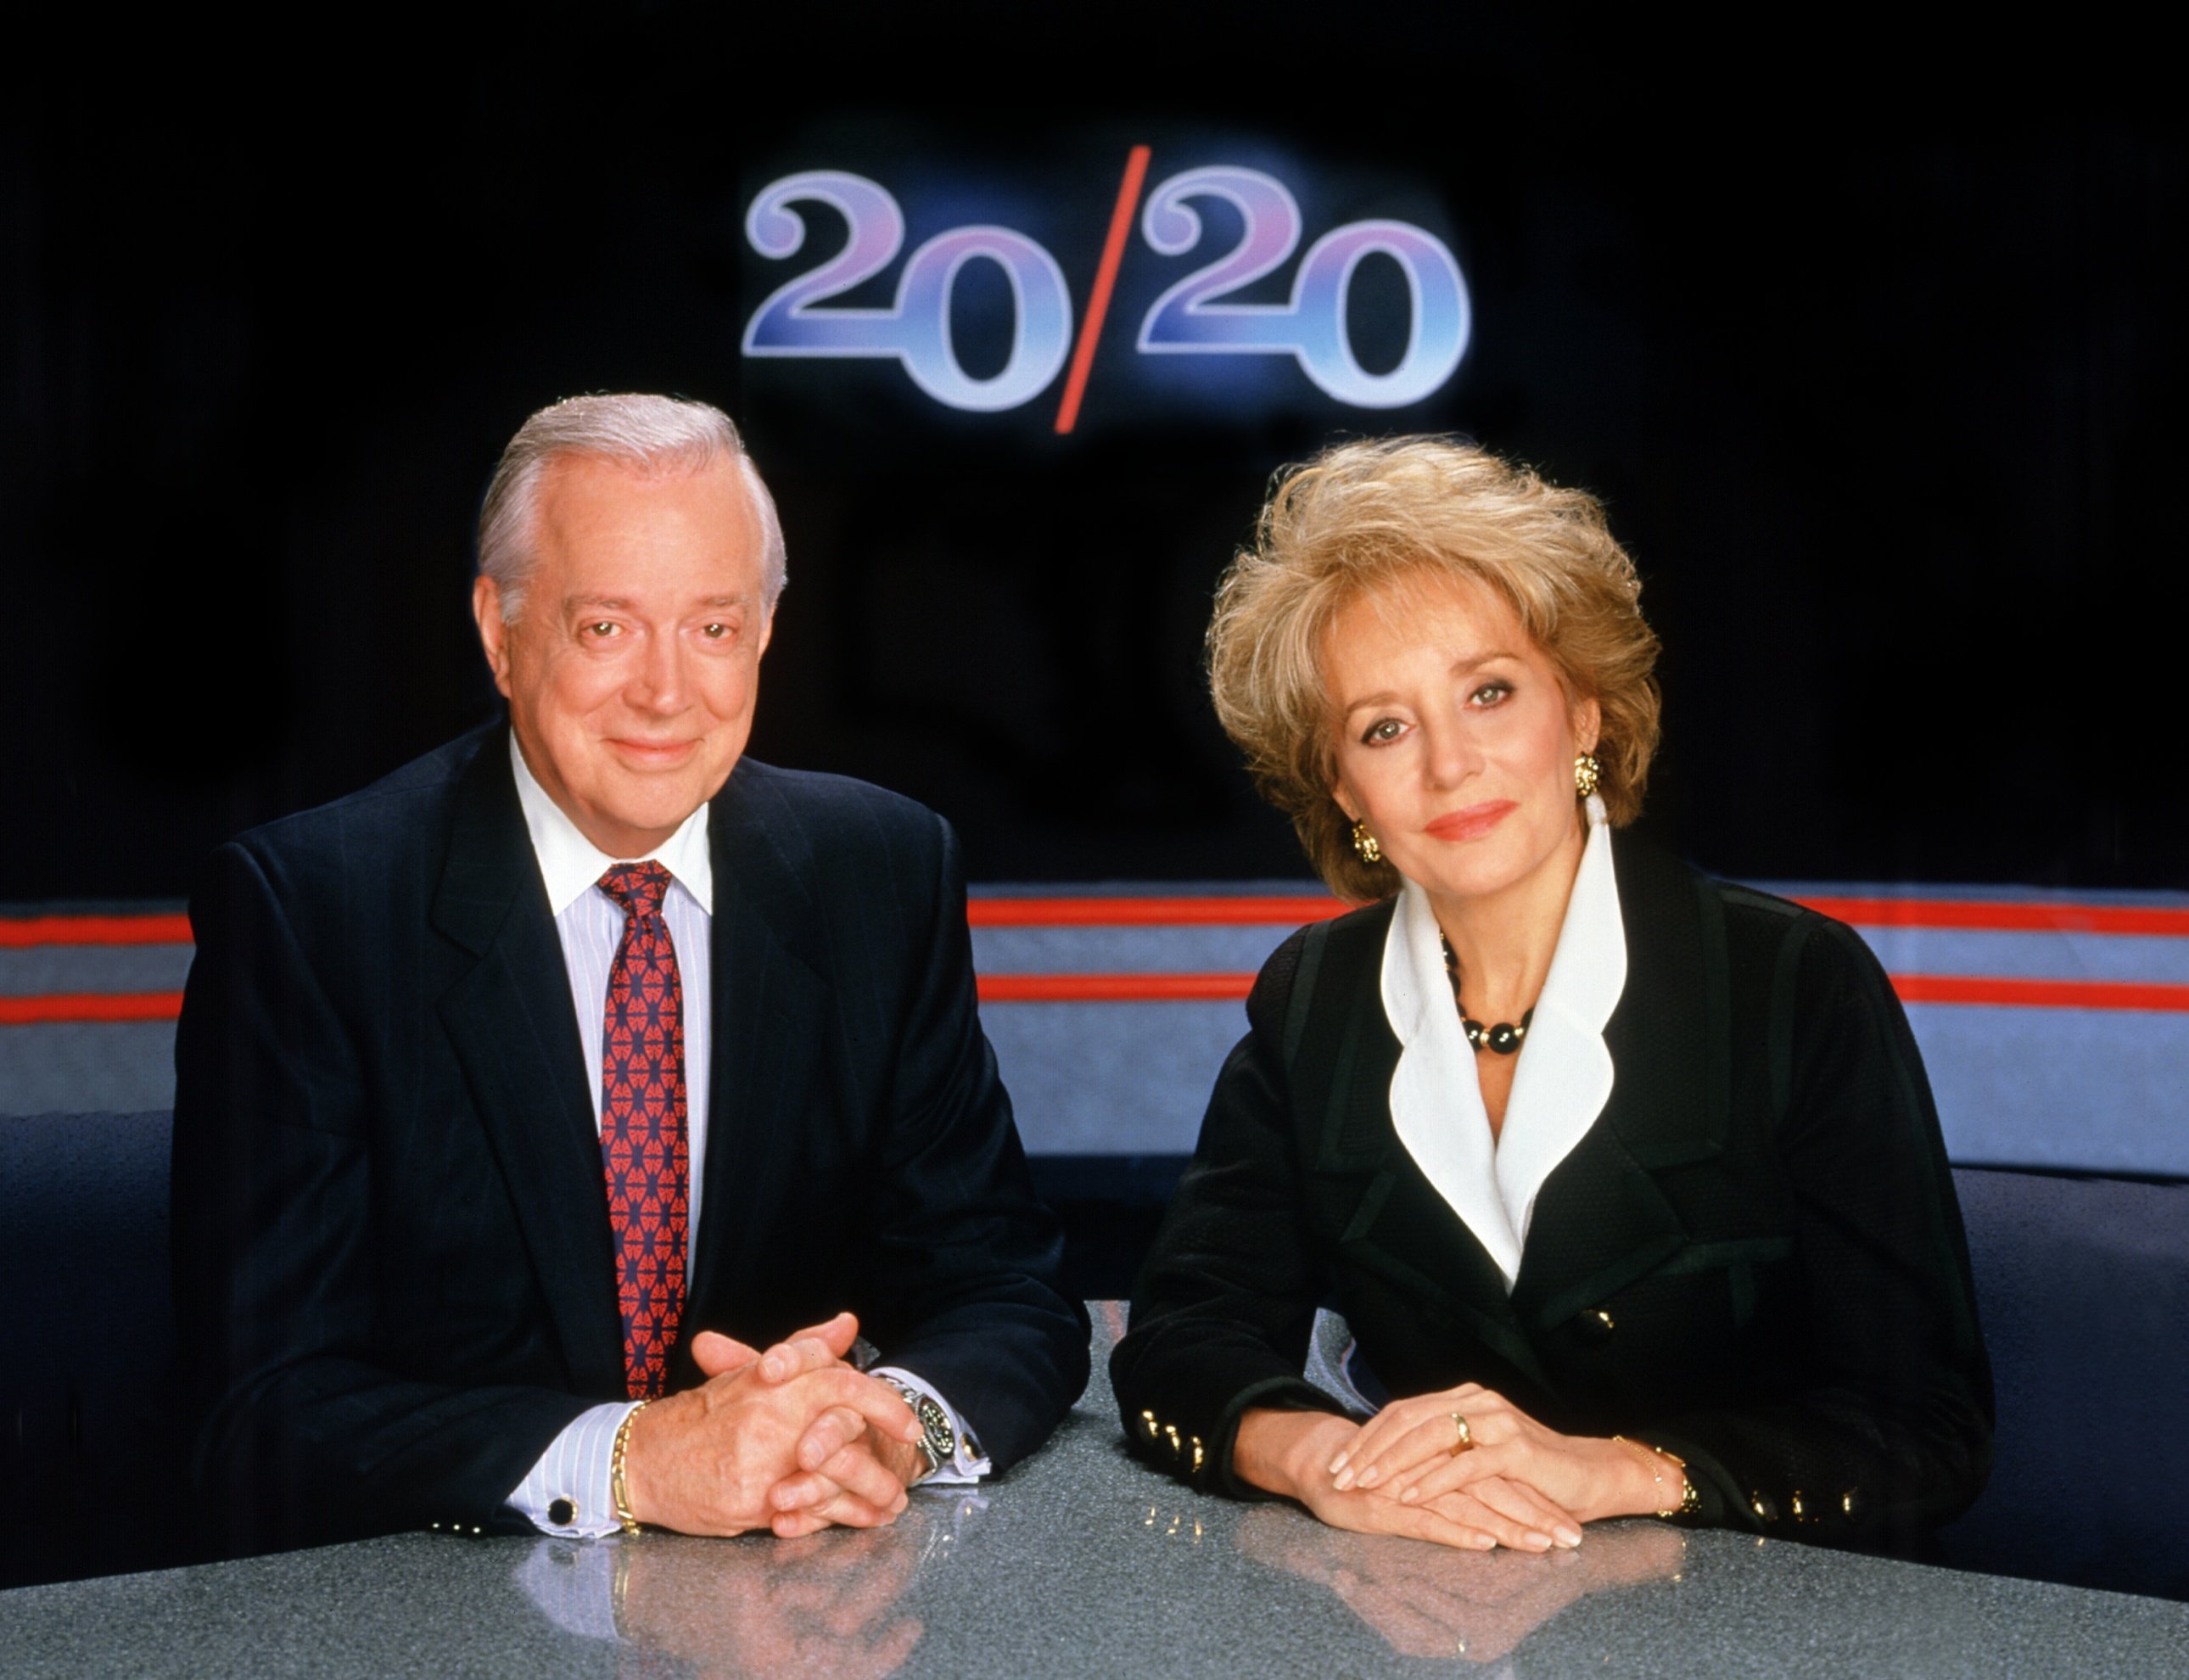 Broadcasters Hugh Downs and Barbara Walters on the set of the news program "20/20" on October 1, 1999 ┃Source: Getty Images